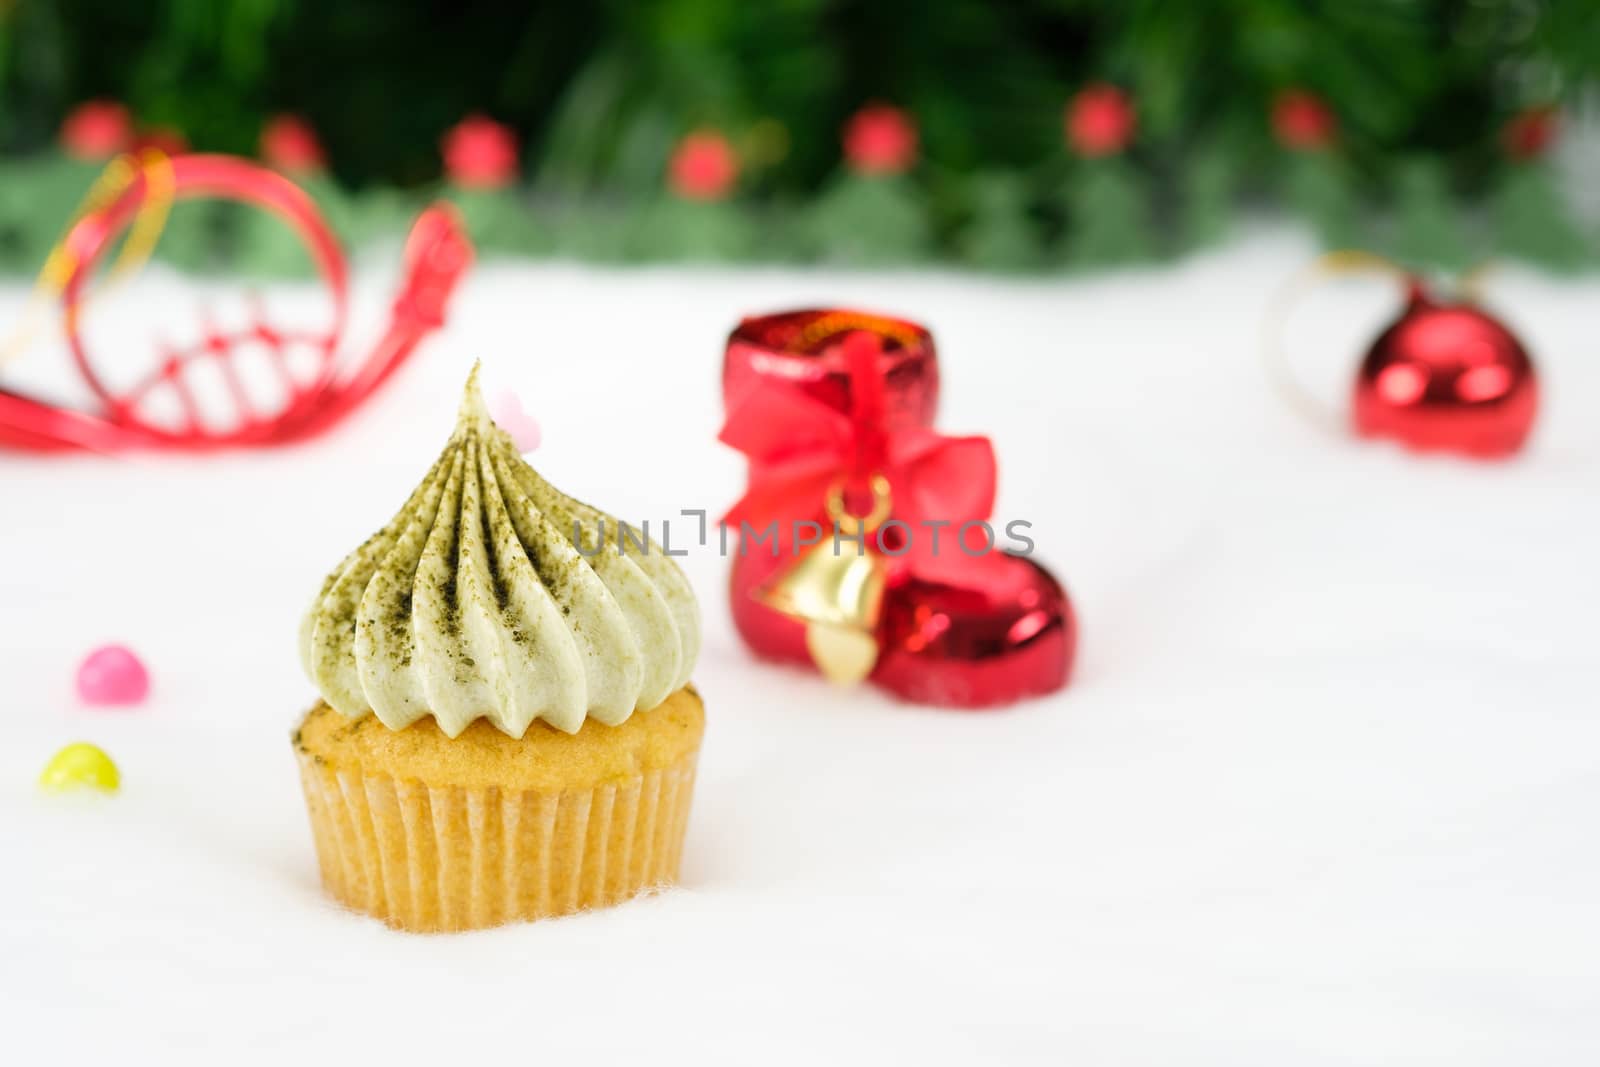 Christmas Cupcake with small red boots, Sprinkle candy in many colors around, fir tree background.